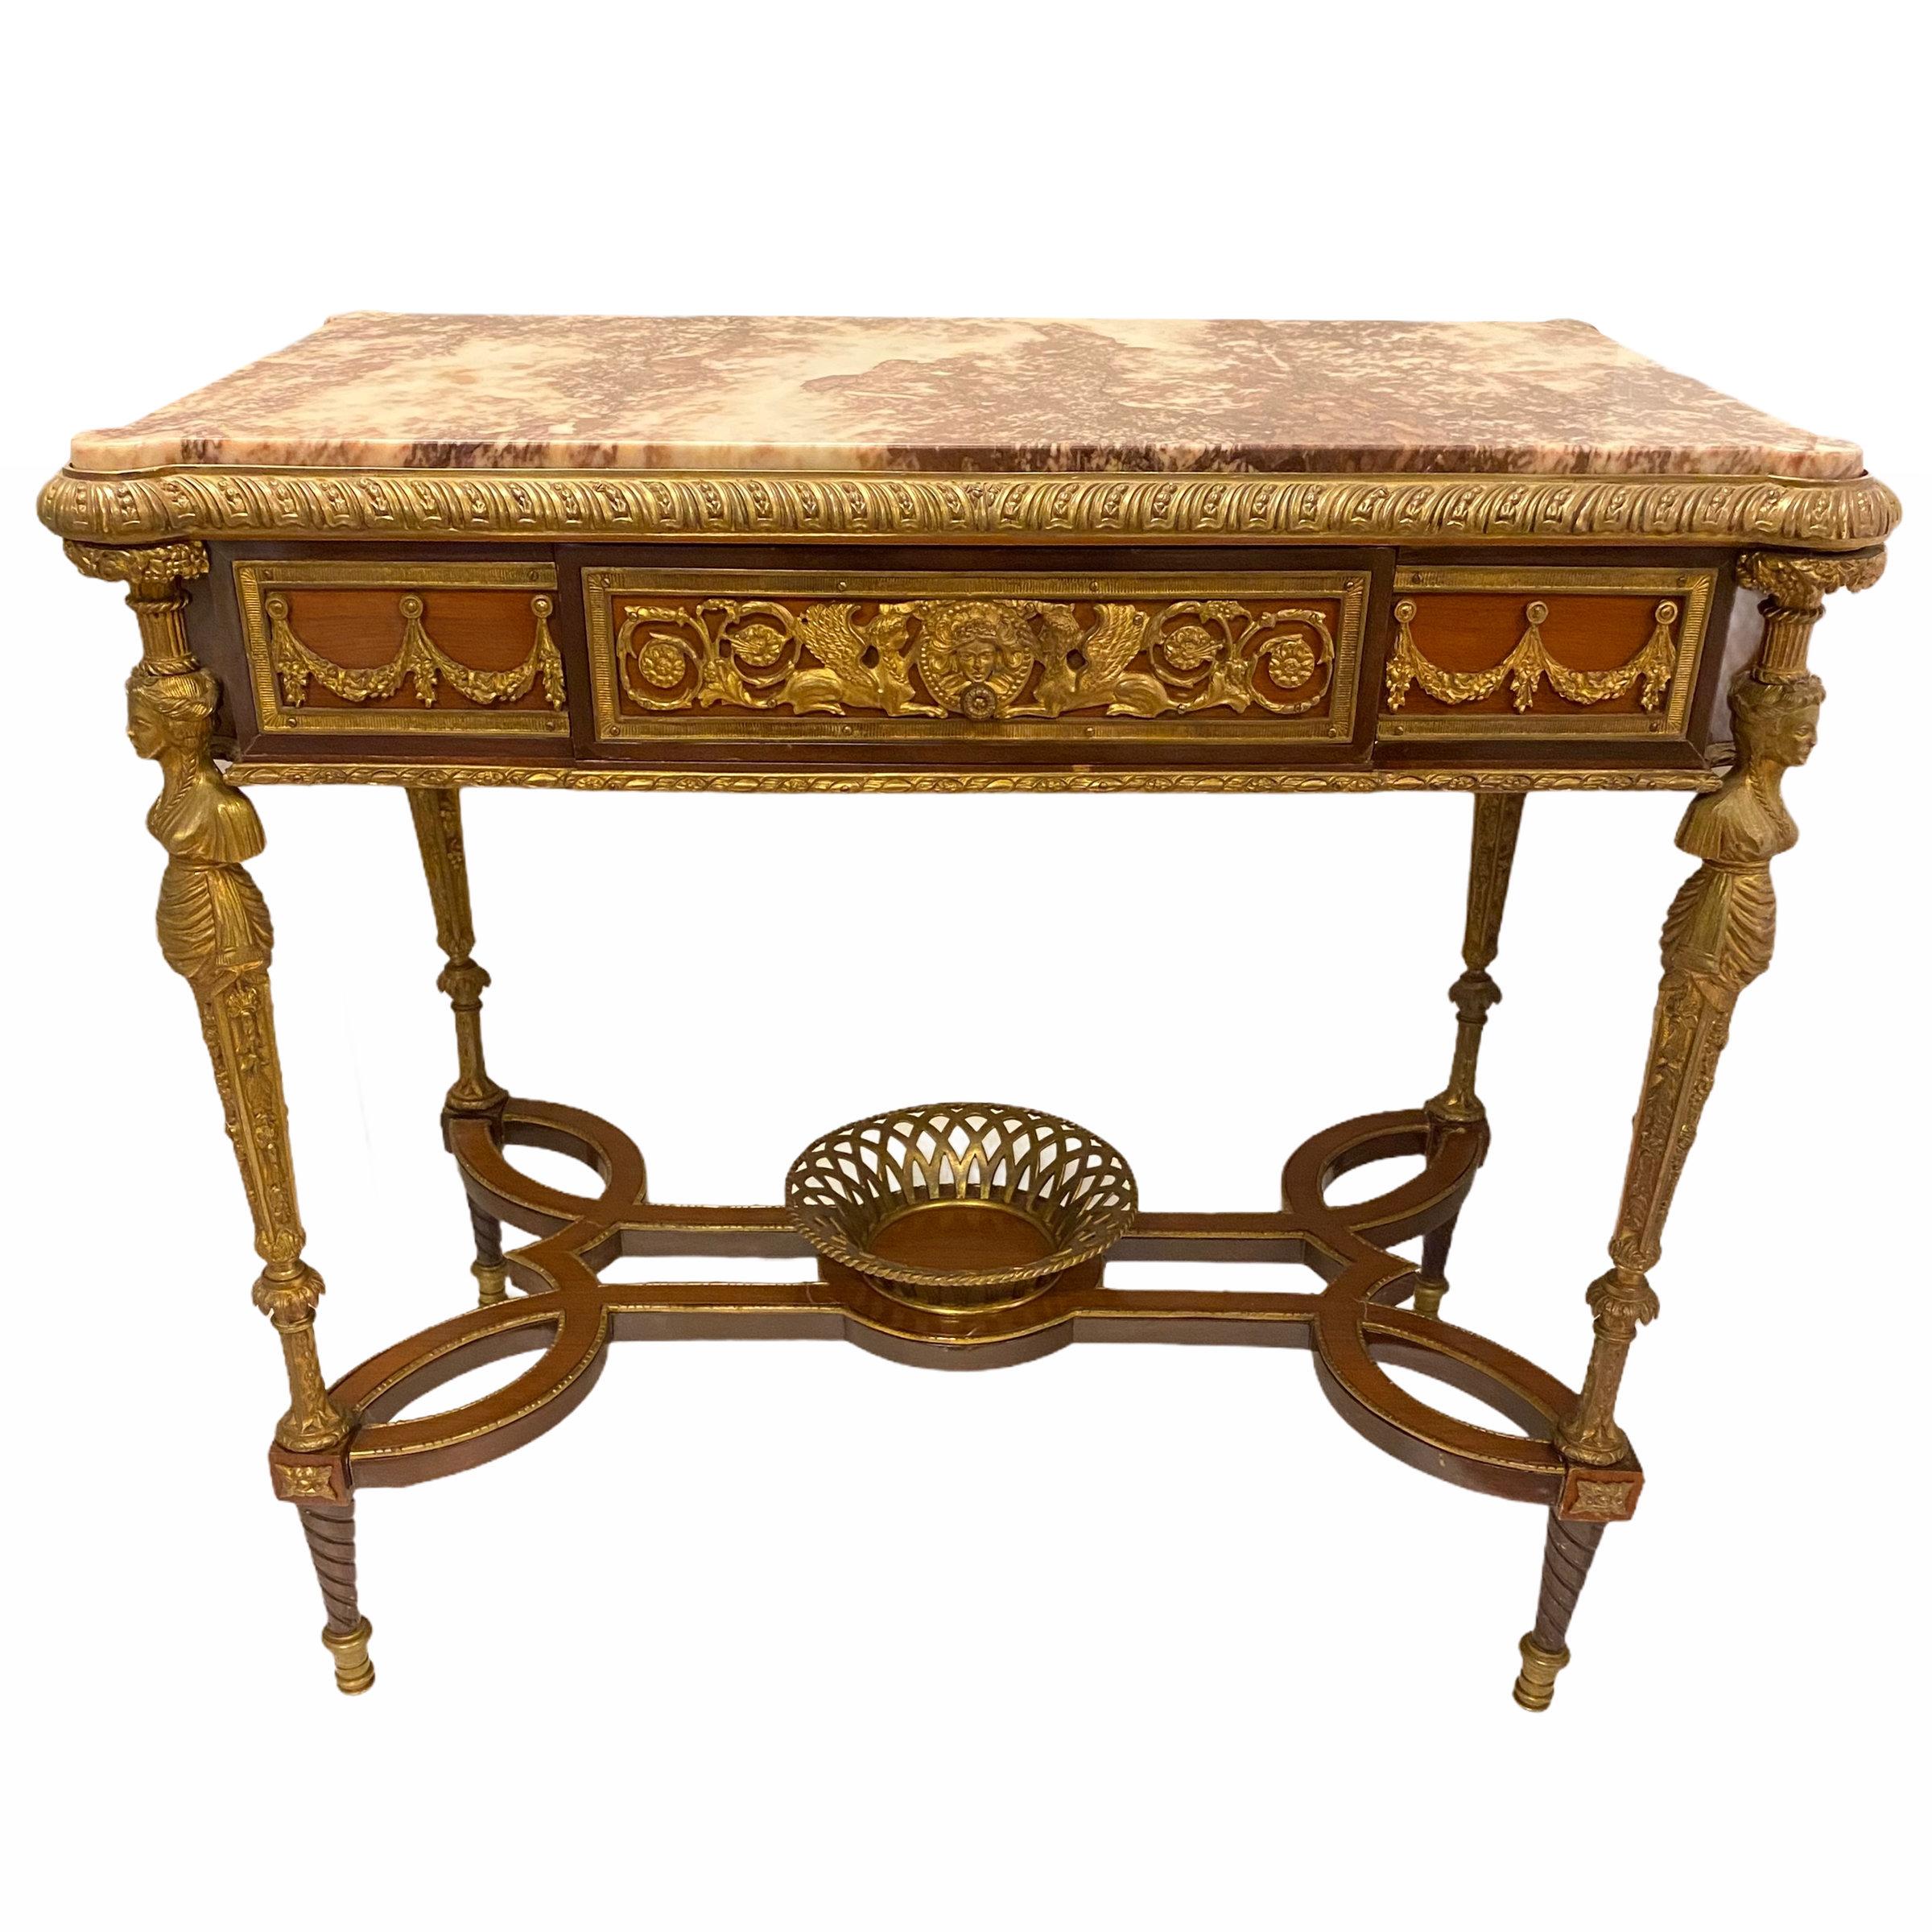 Very nice quality Louis XVI style bronze mounted figural marble top side table.
 